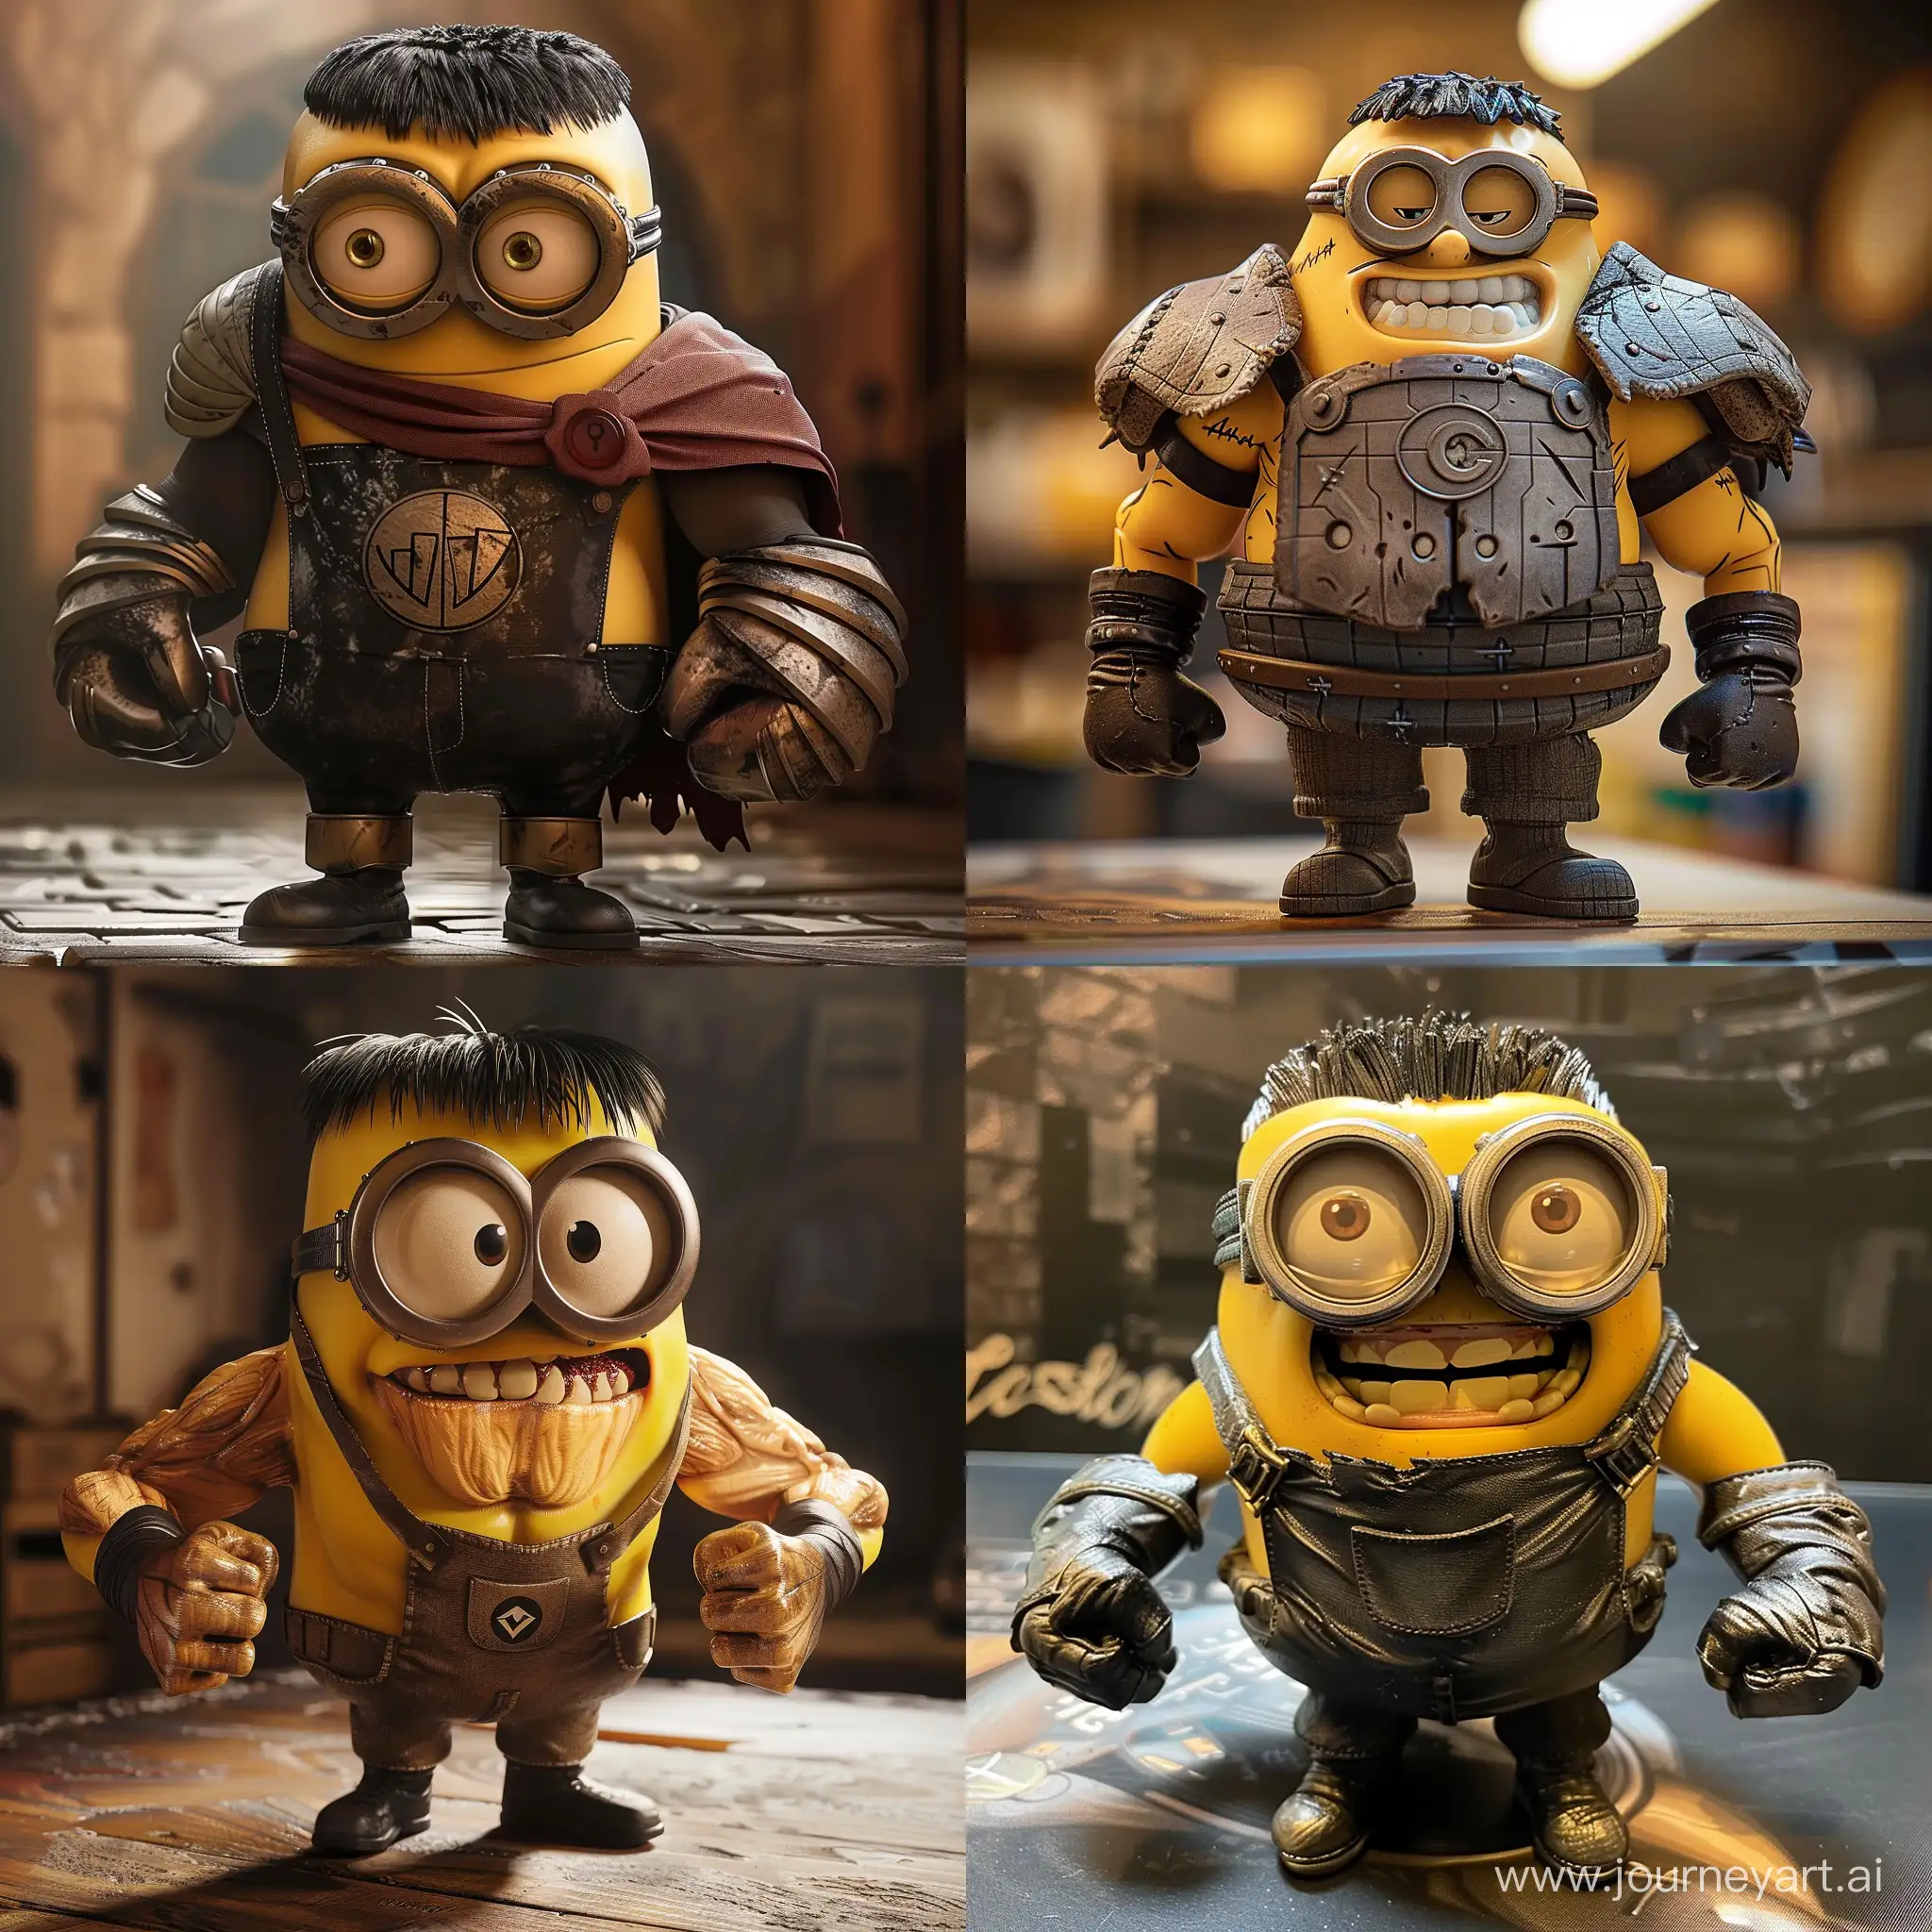 Minion-from-Despicable-Me-Cosplaying-as-Guts-from-Berserk